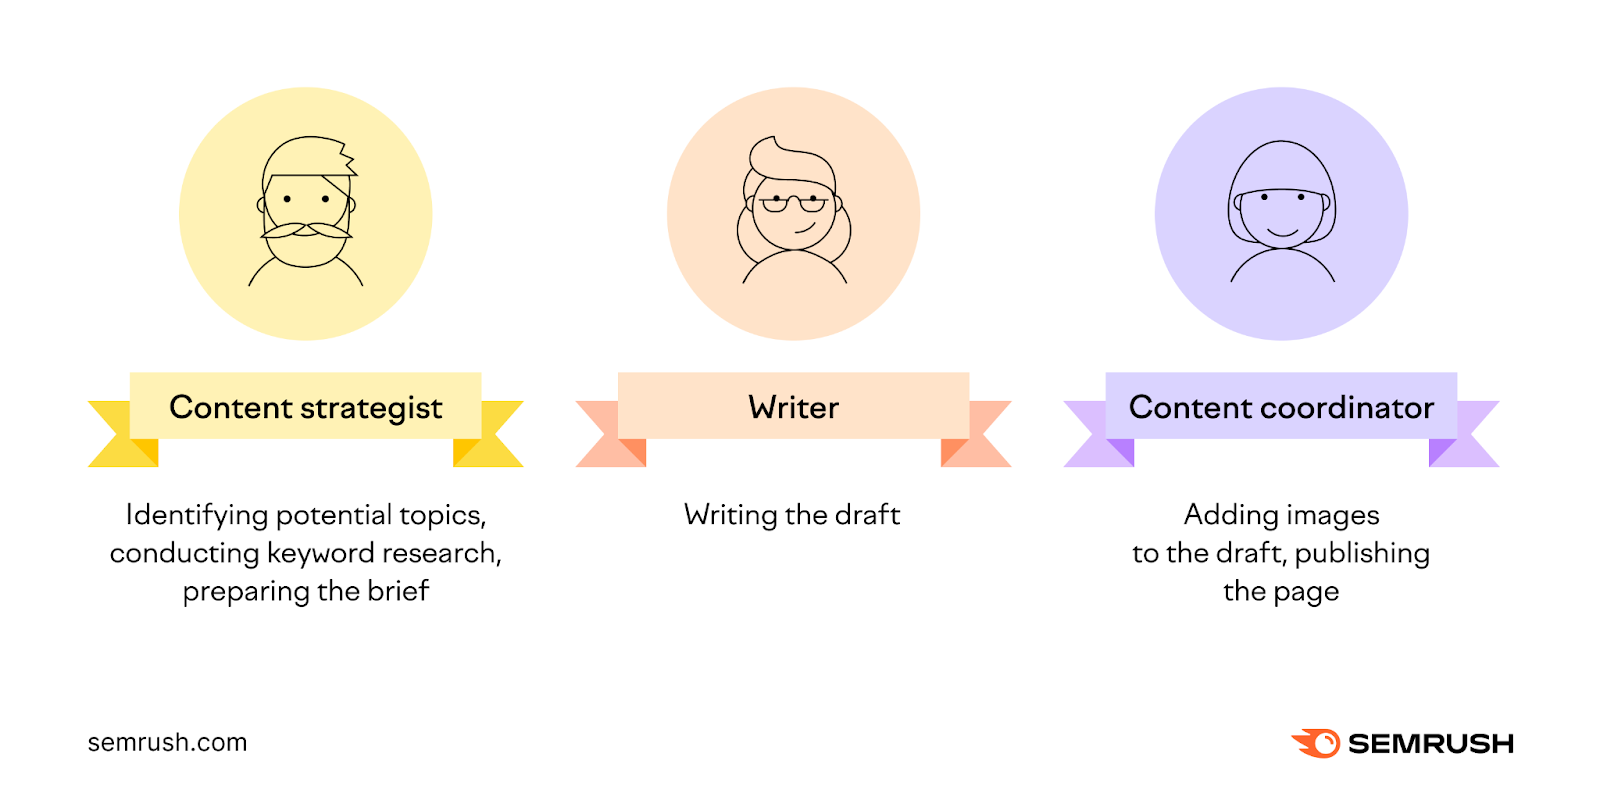 Content strategist, writer, and content coordinator team roles defined